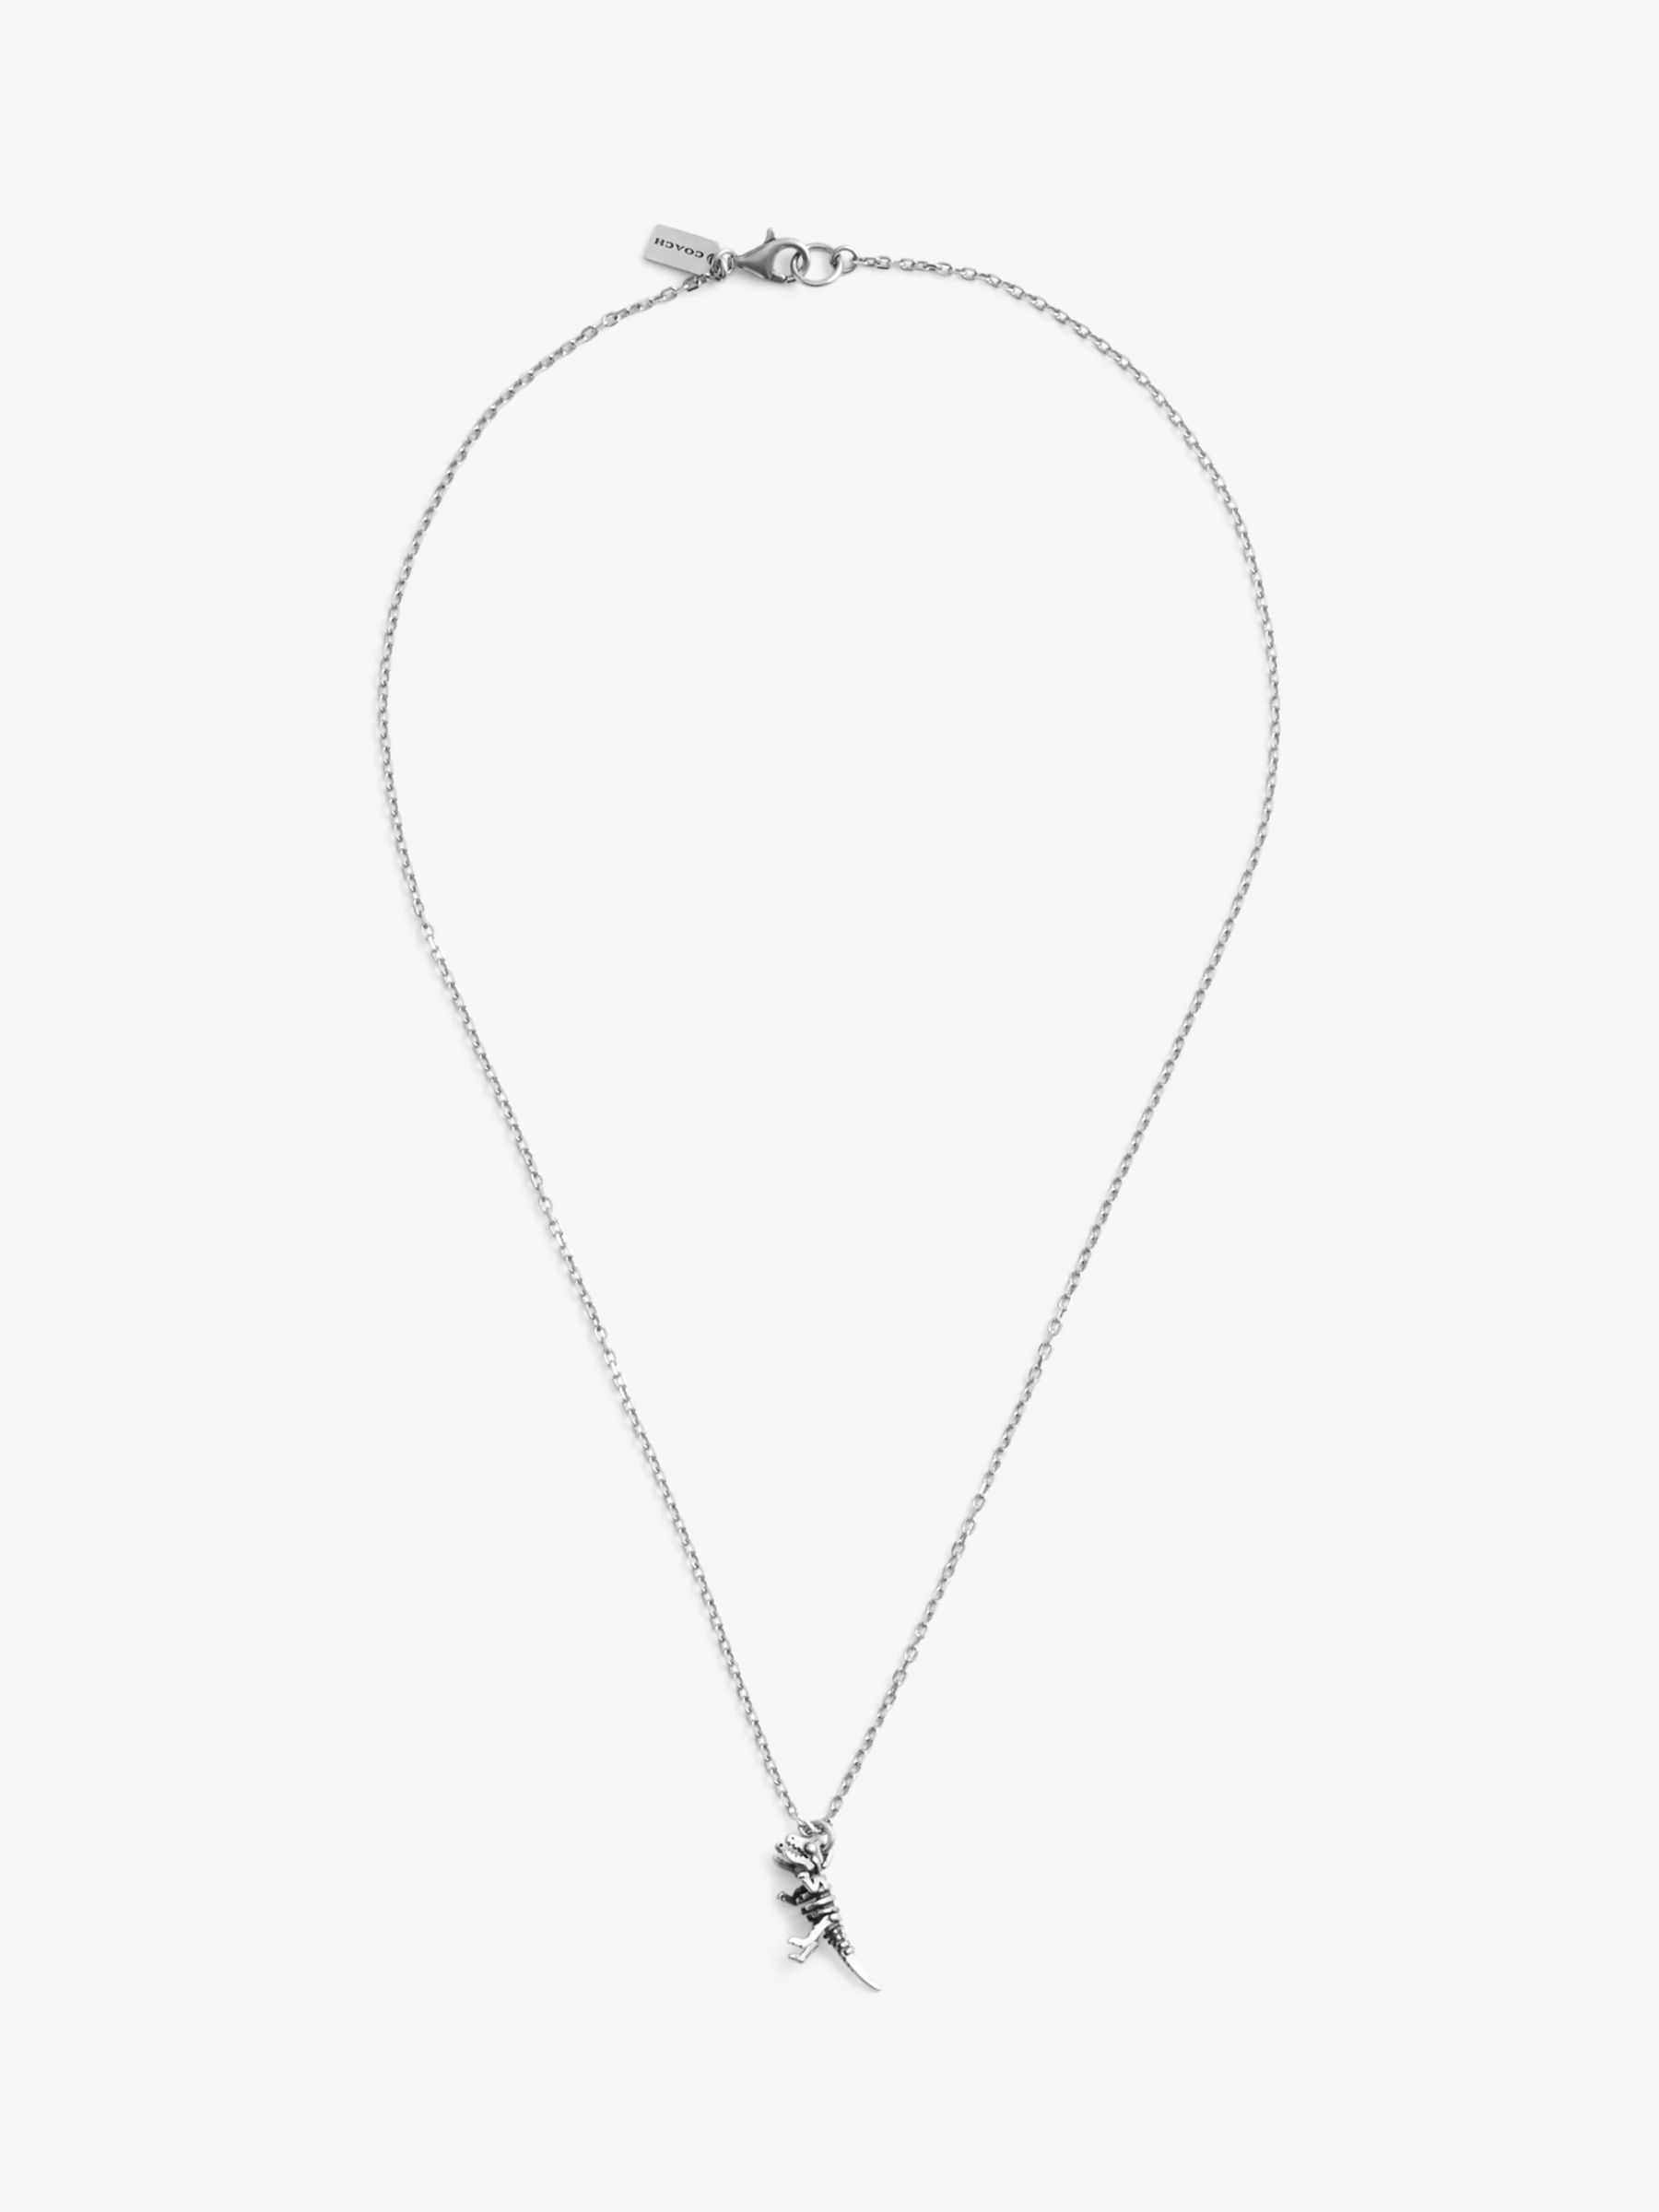 Buy Coach Rexy Dino Skeleton Pendant Necklace, Silver Online at johnlewis.com